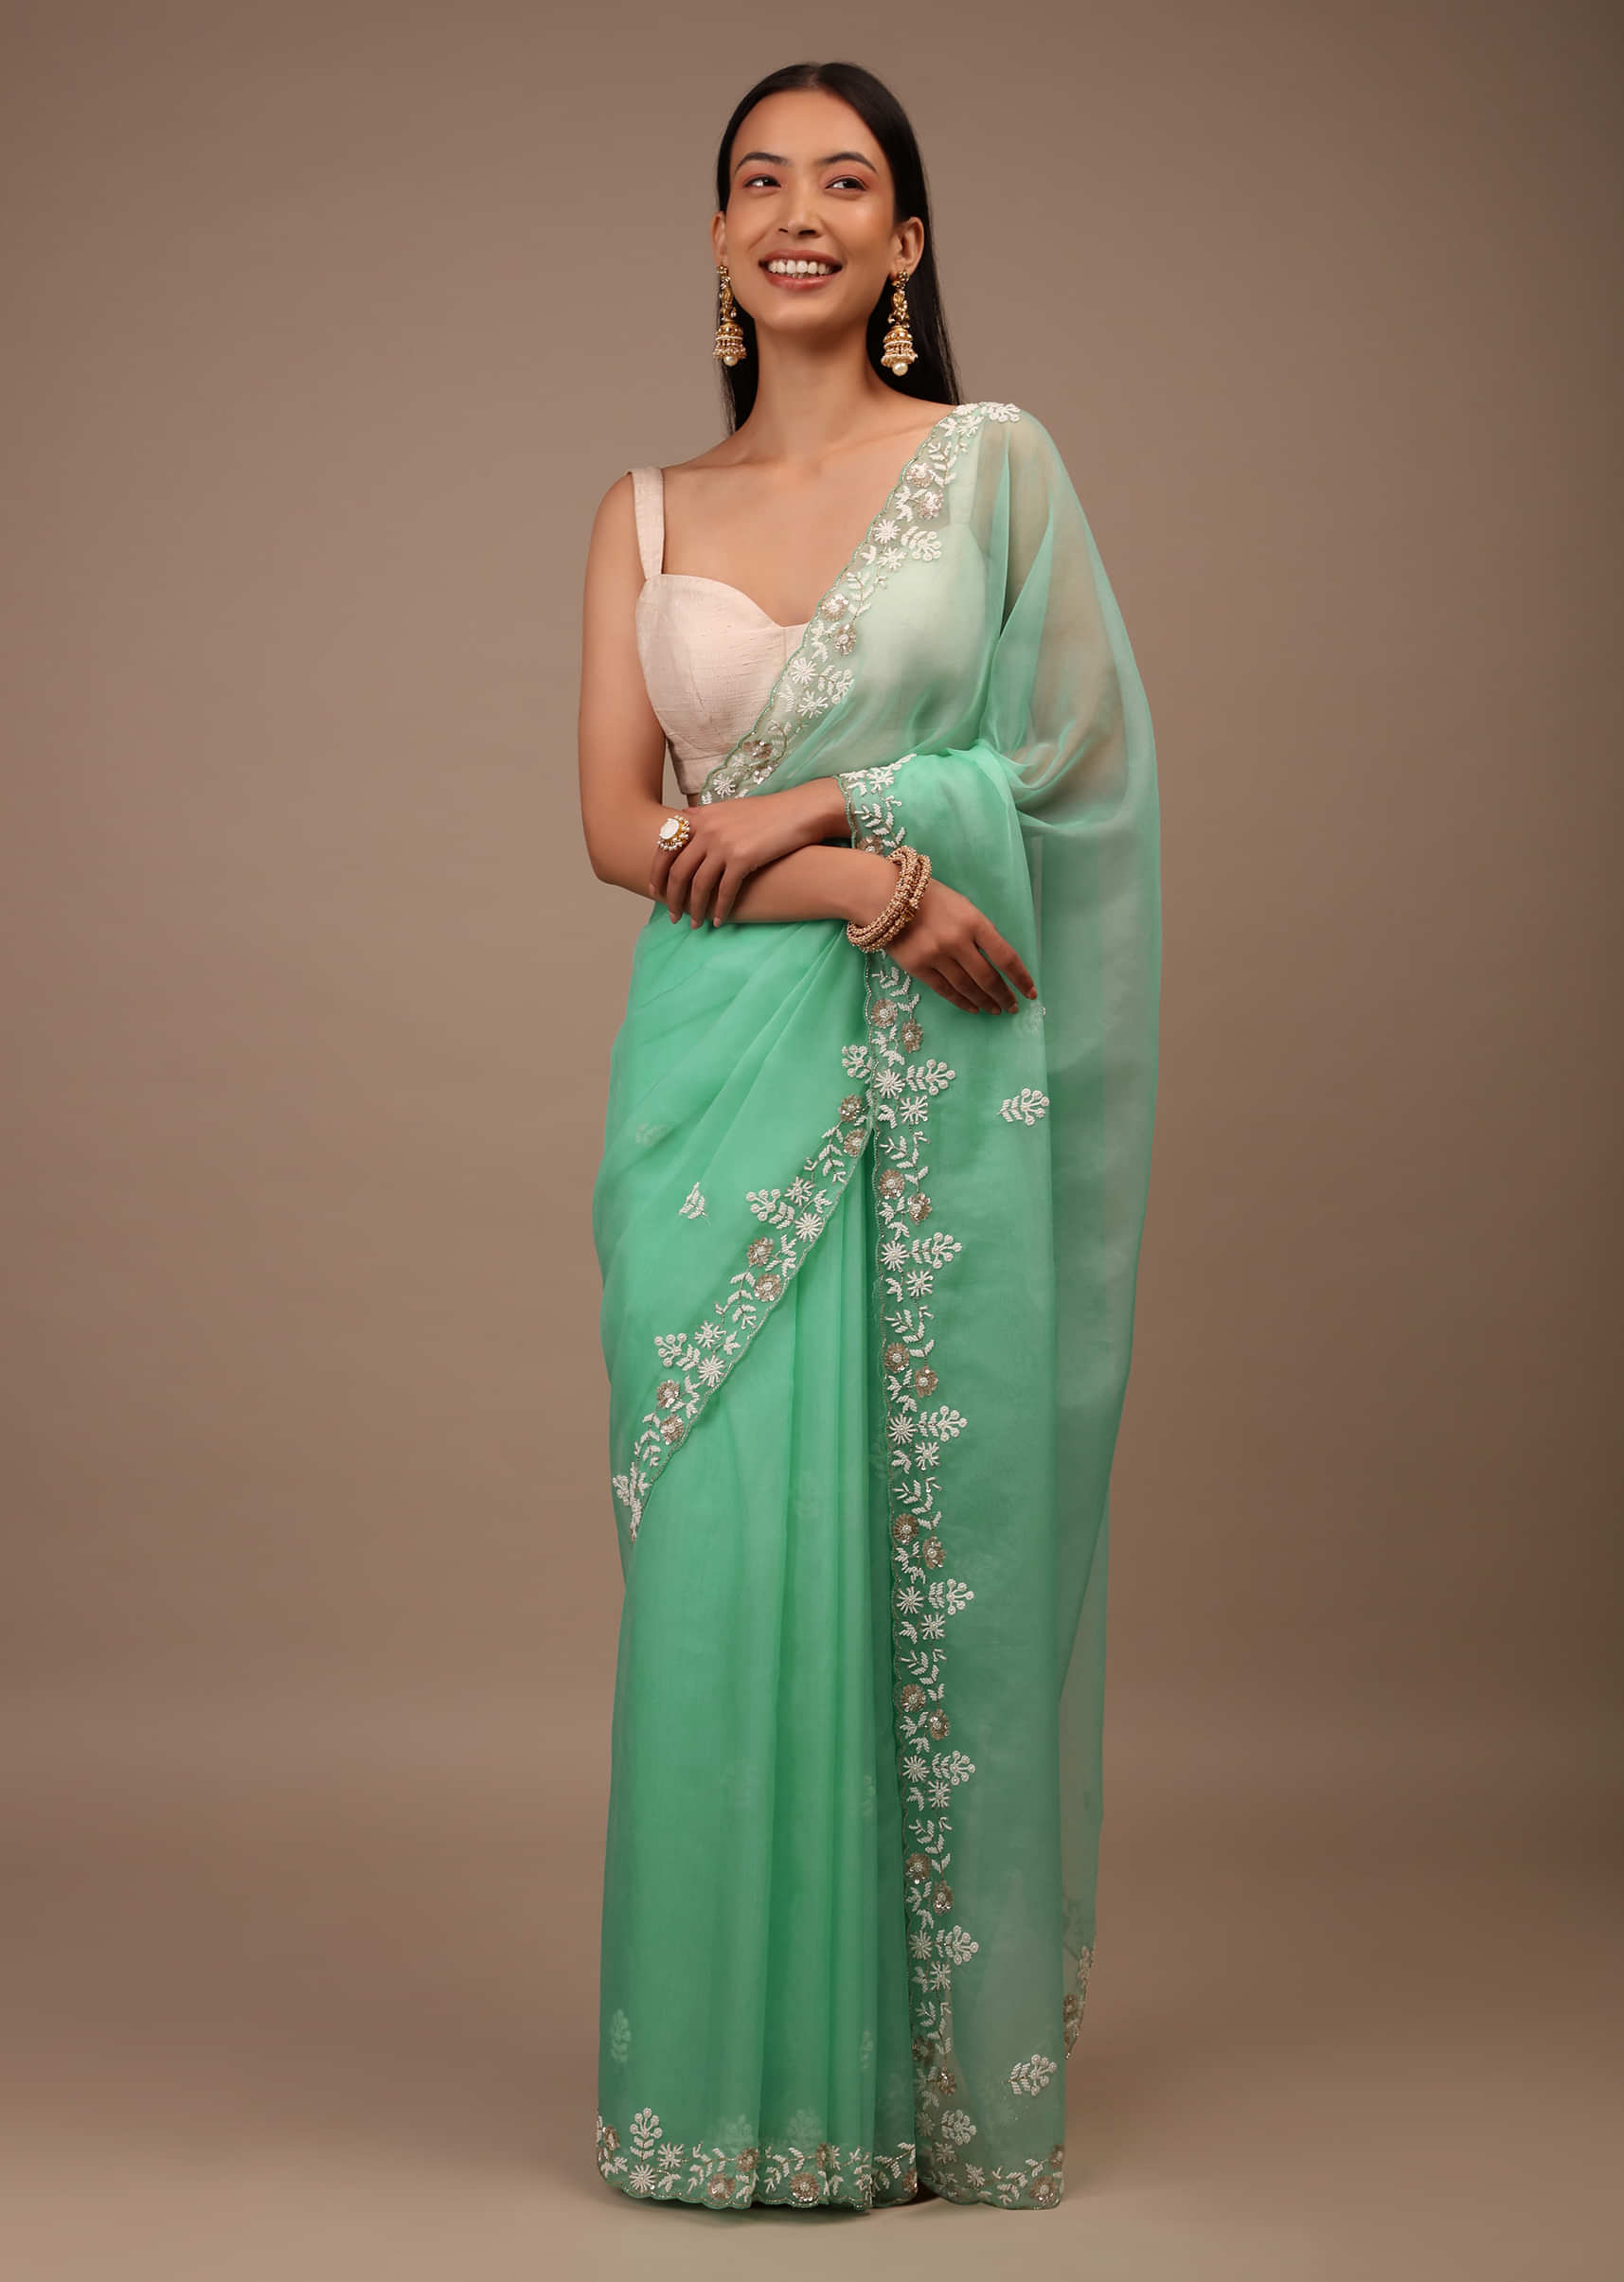 Sea Green Saree In Organza With Hand Embroidered Moti And Sequin Work On The Border And Butti Design